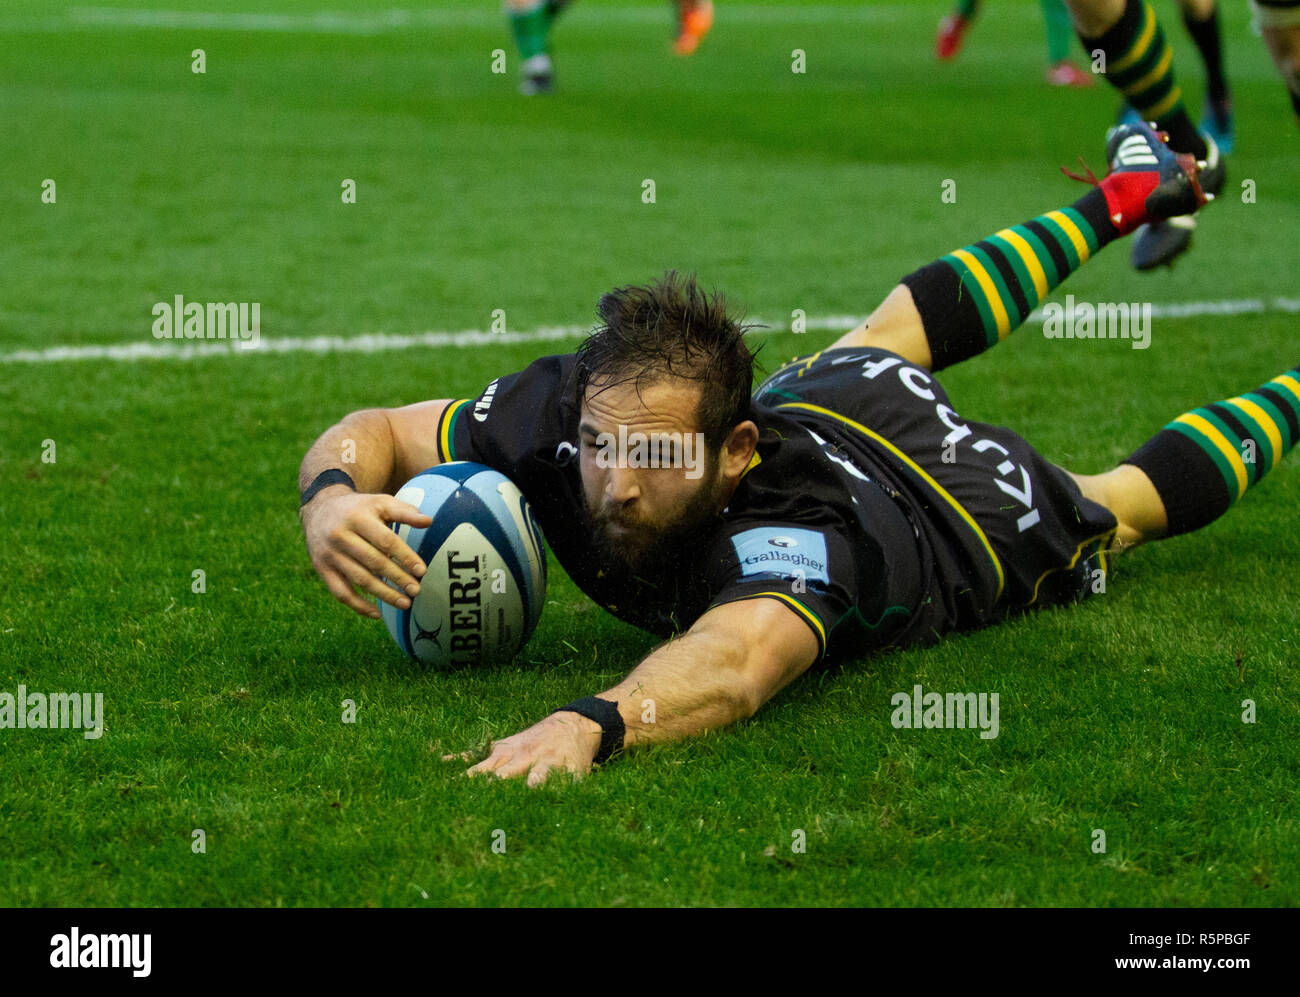 Northampton, UK. 1st December 2018. Cobus Reinach of Northampton Saints scores a try during the Gallagher Premiership Rugby match between Northampton Saints and Newcastle Falcons. Andrew Taylor/Alamy Live News Stock Photo